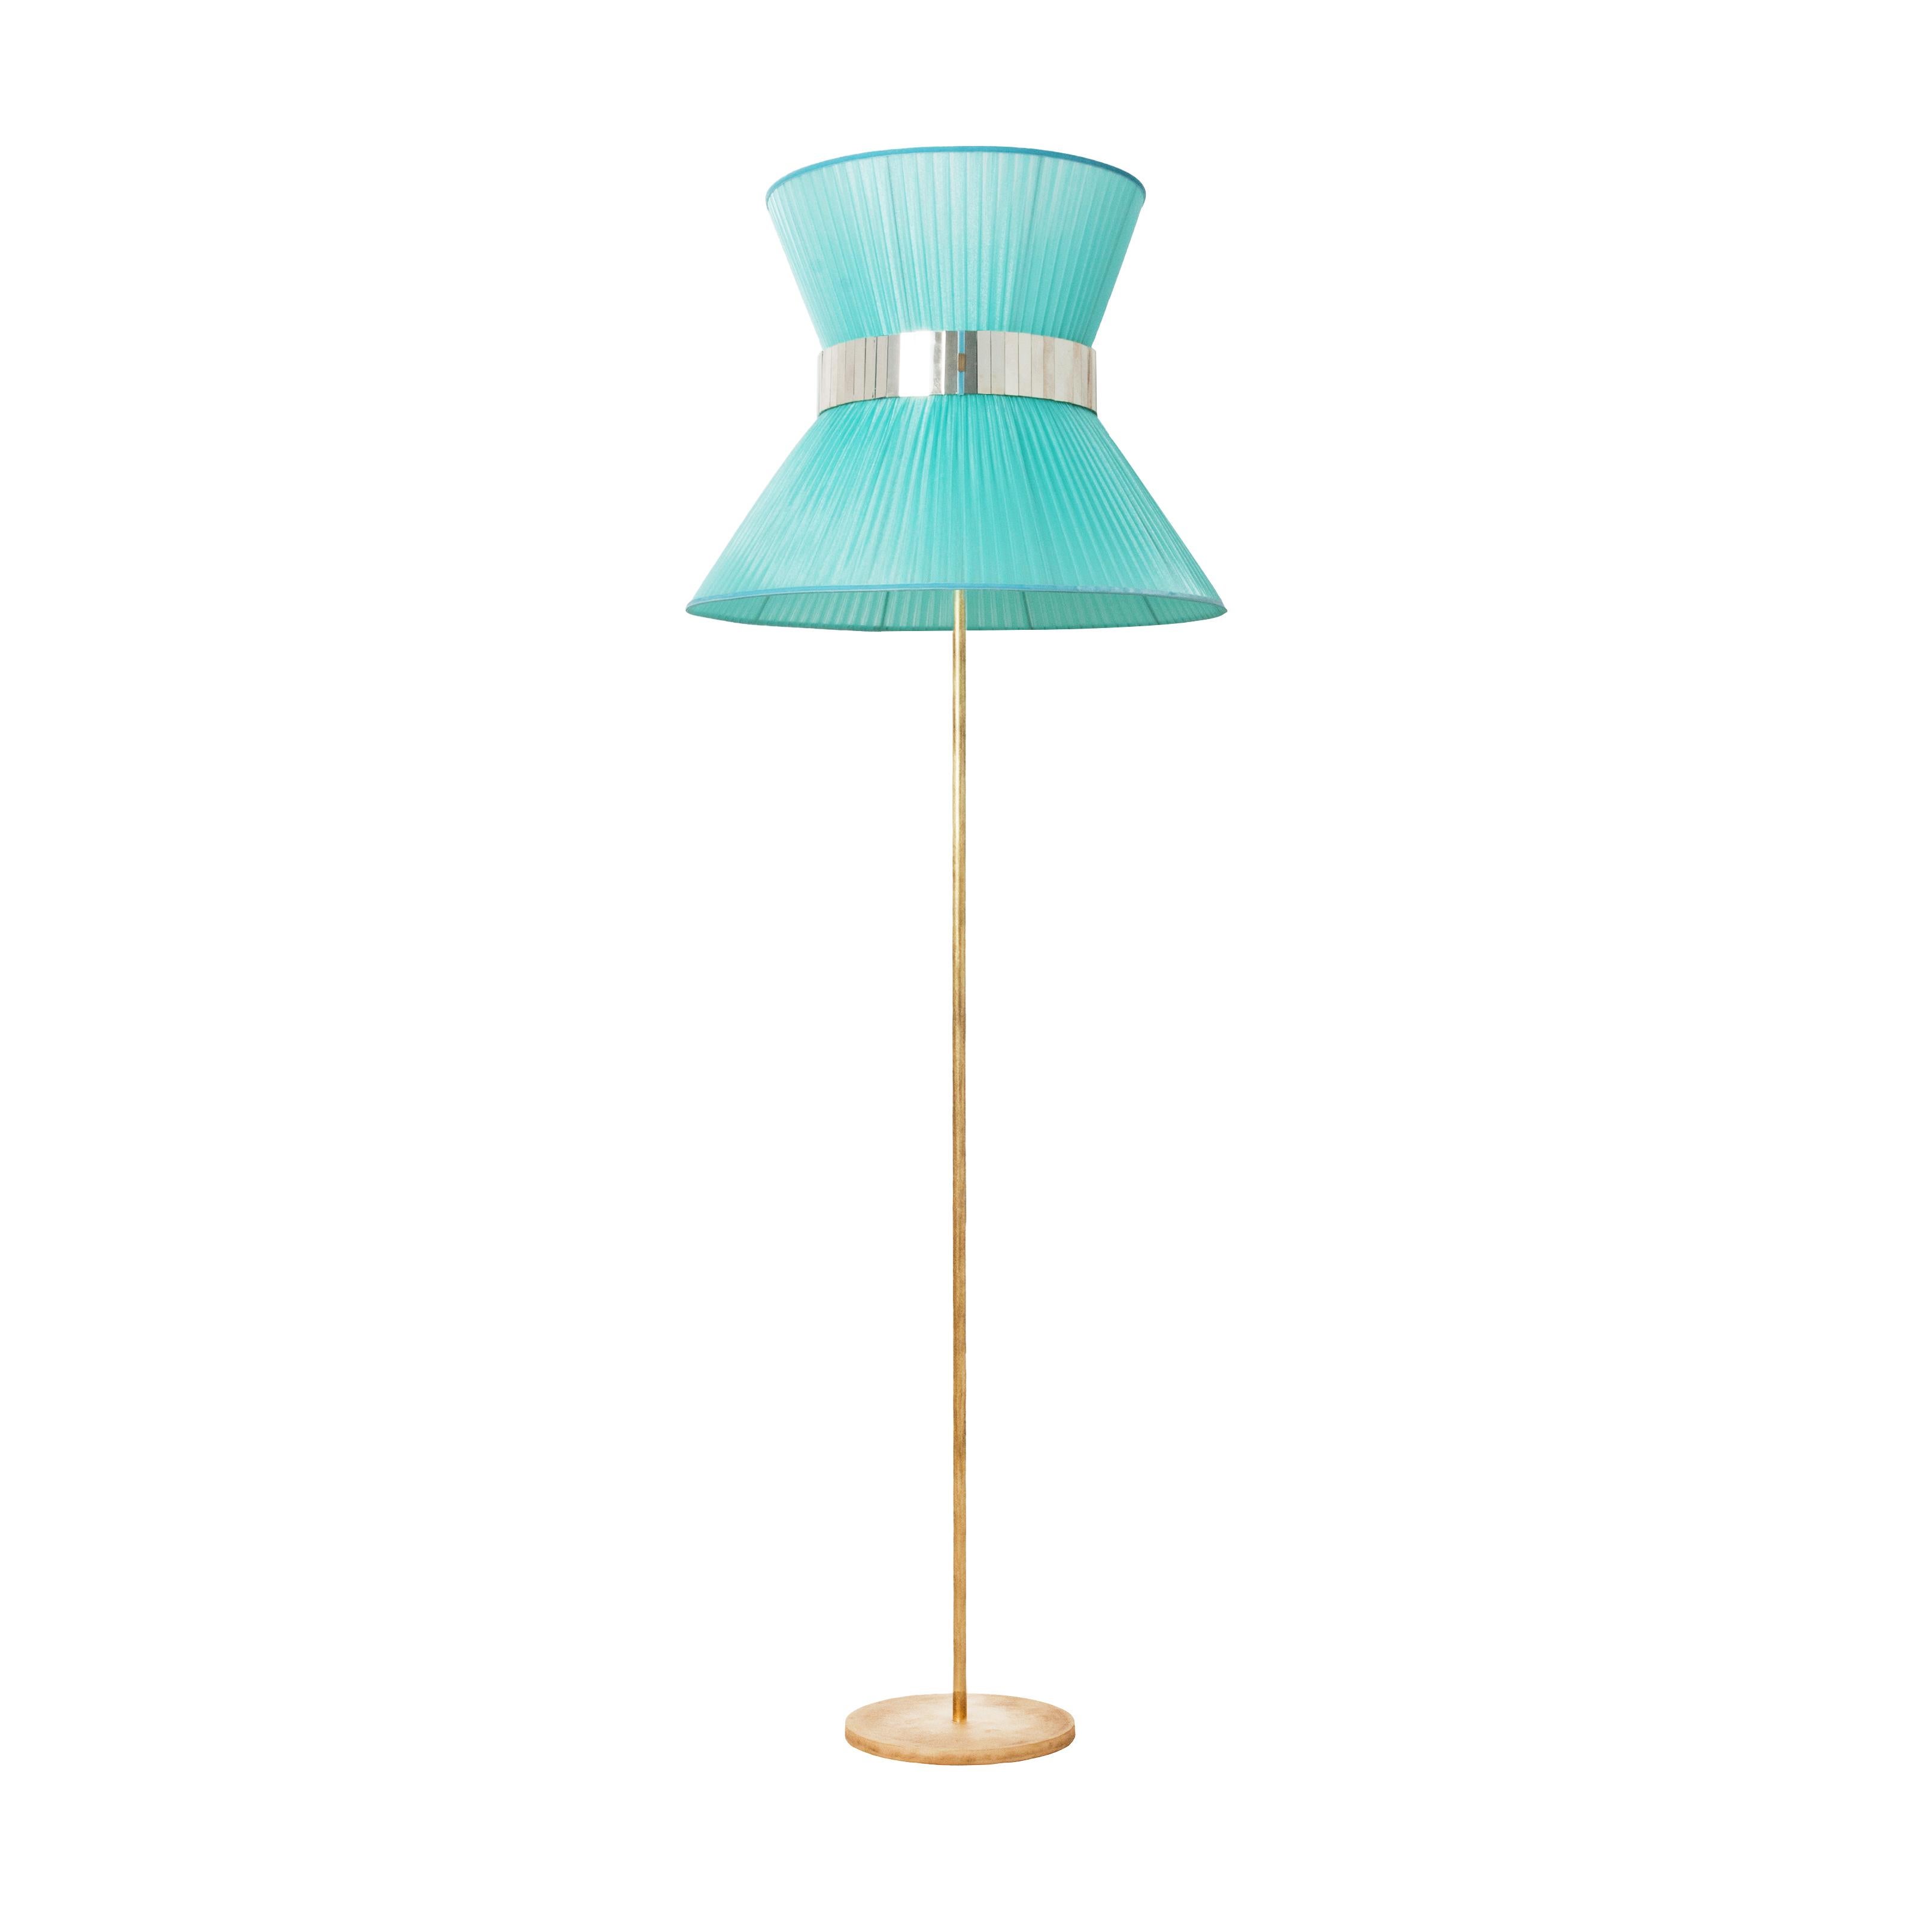 TIFFANY the iconic lamp!

Introducing Sabrina's breathtaking collection of Tiffany lamps.
Sabrina Landini selects the most beautiful materials and assemble them to create home decorative items recognized throughout the world.

Elegance and colors